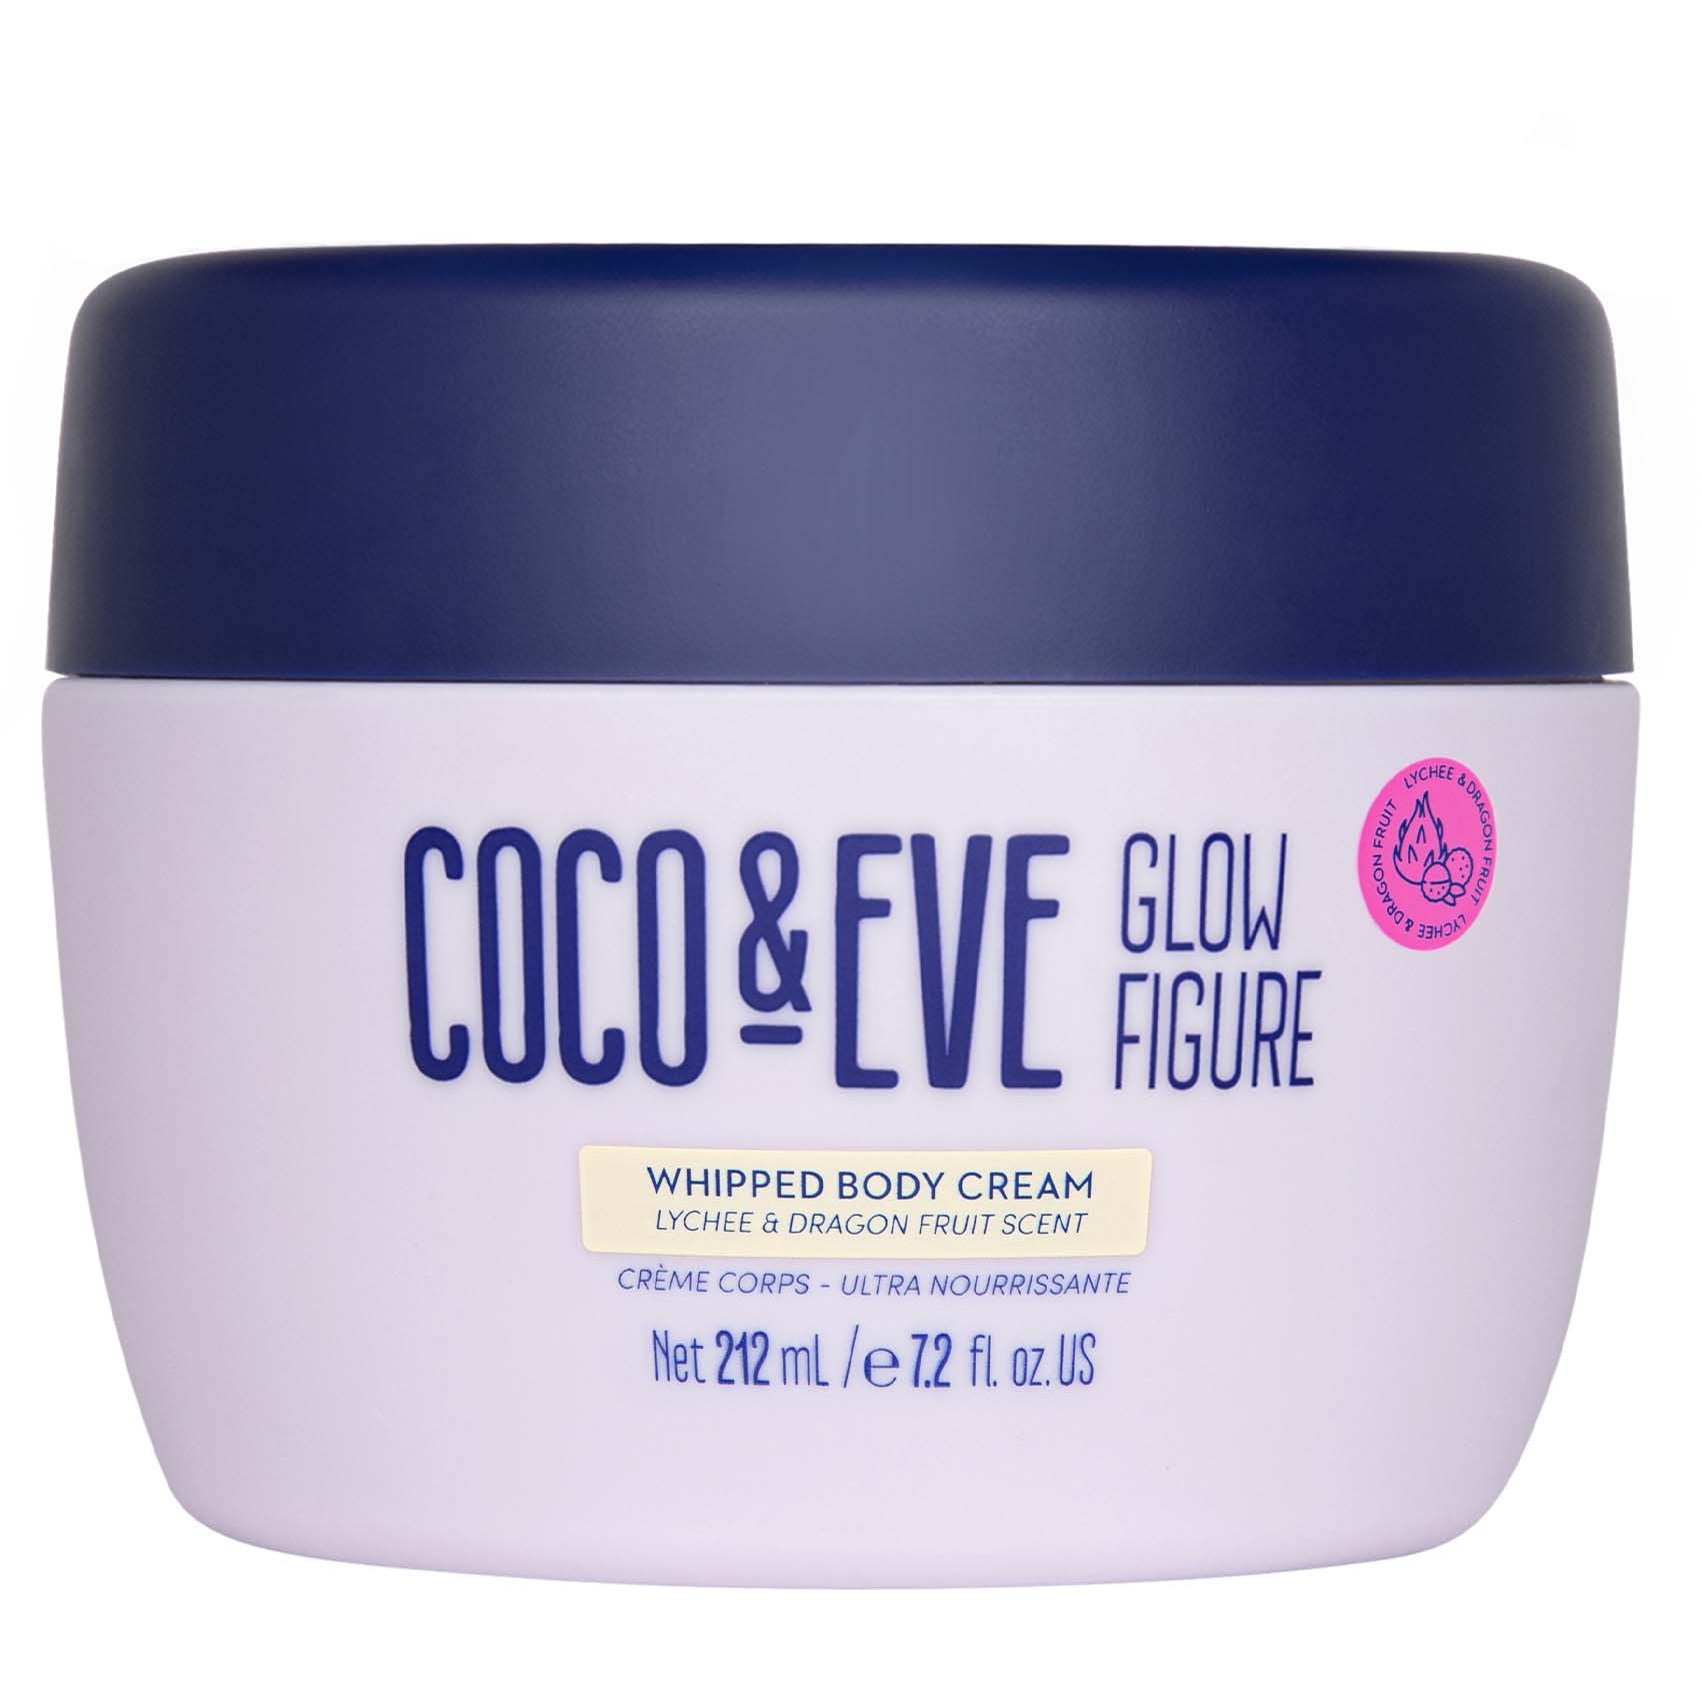 Läs mer om Coco & Eve Glow Figure Whipped Body Cream Lychee & Dragon Fruit Scent